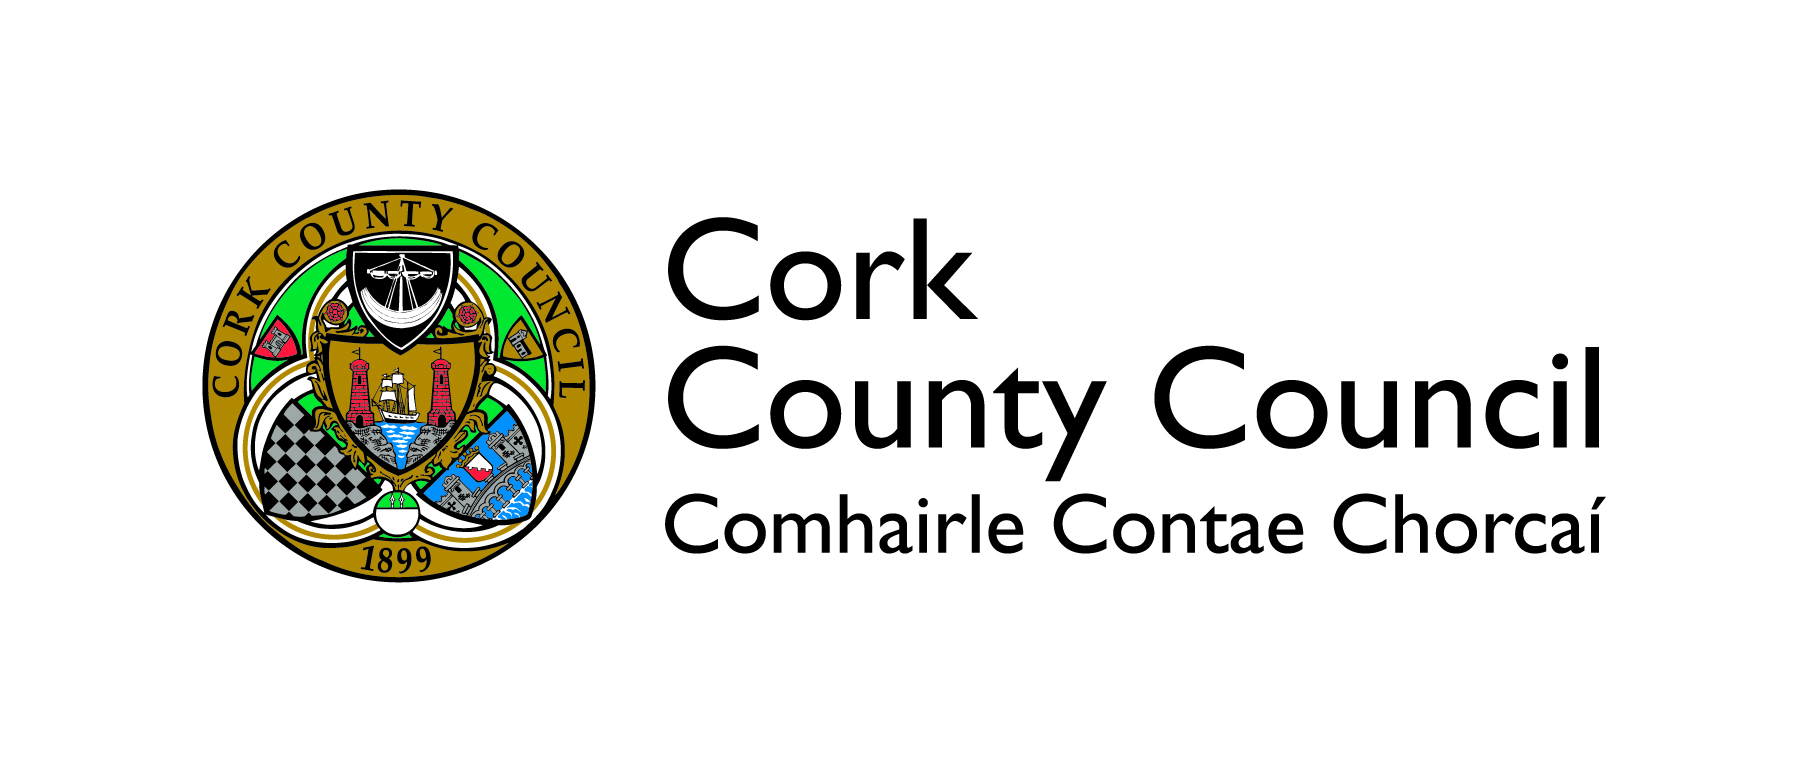 New campaign highlights role Cork County Council plays in daily lives across the county